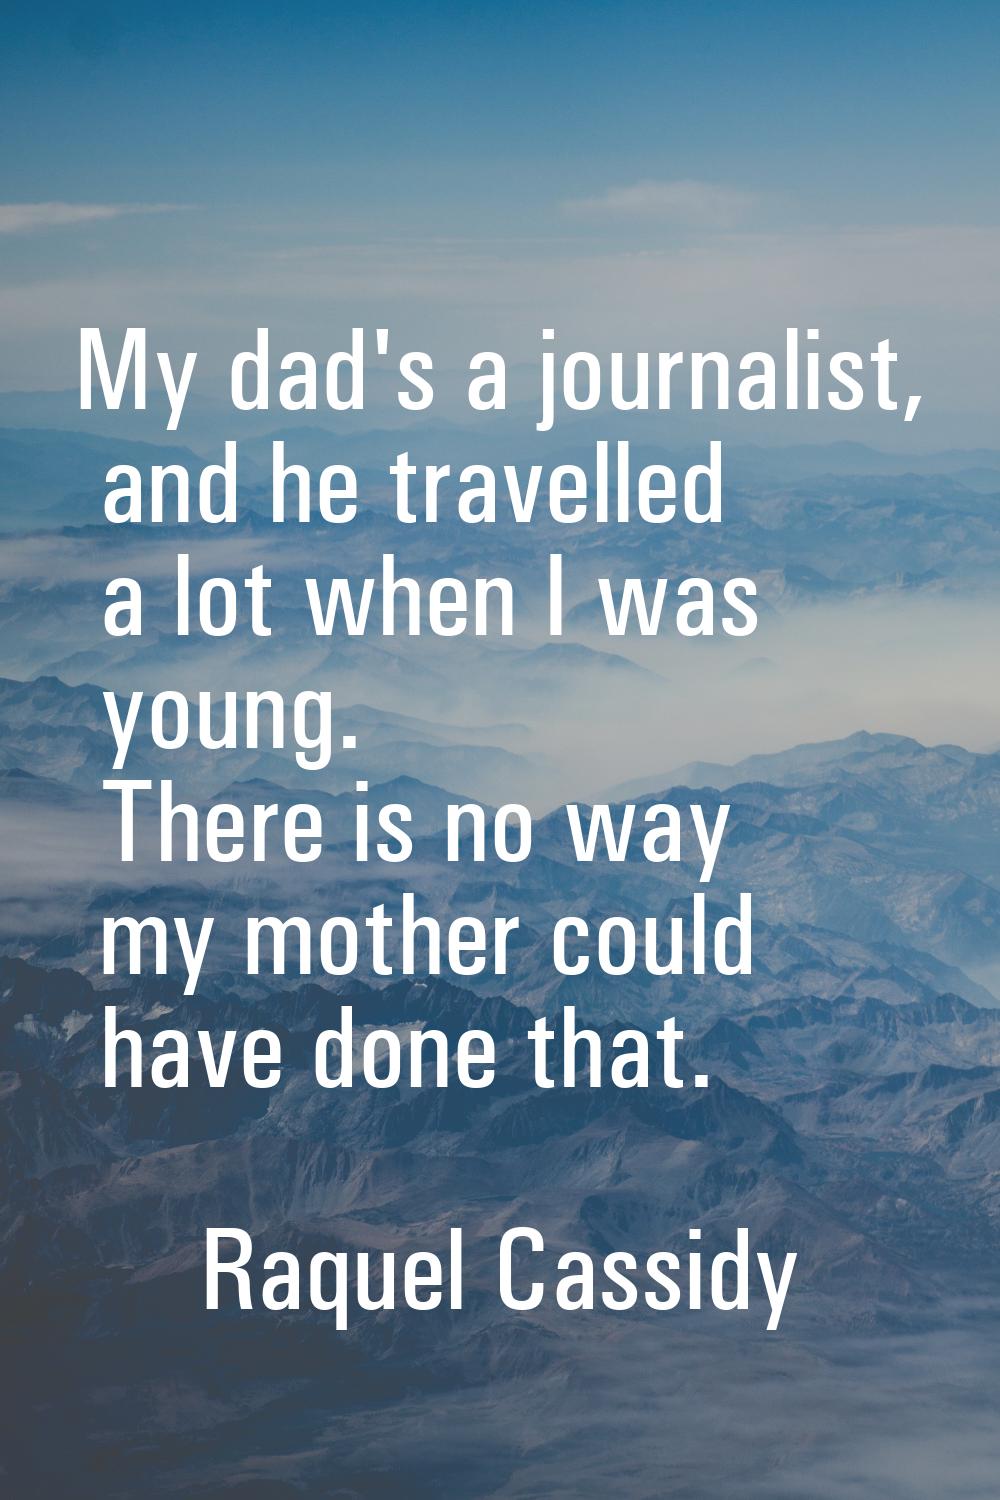 My dad's a journalist, and he travelled a lot when I was young. There is no way my mother could hav